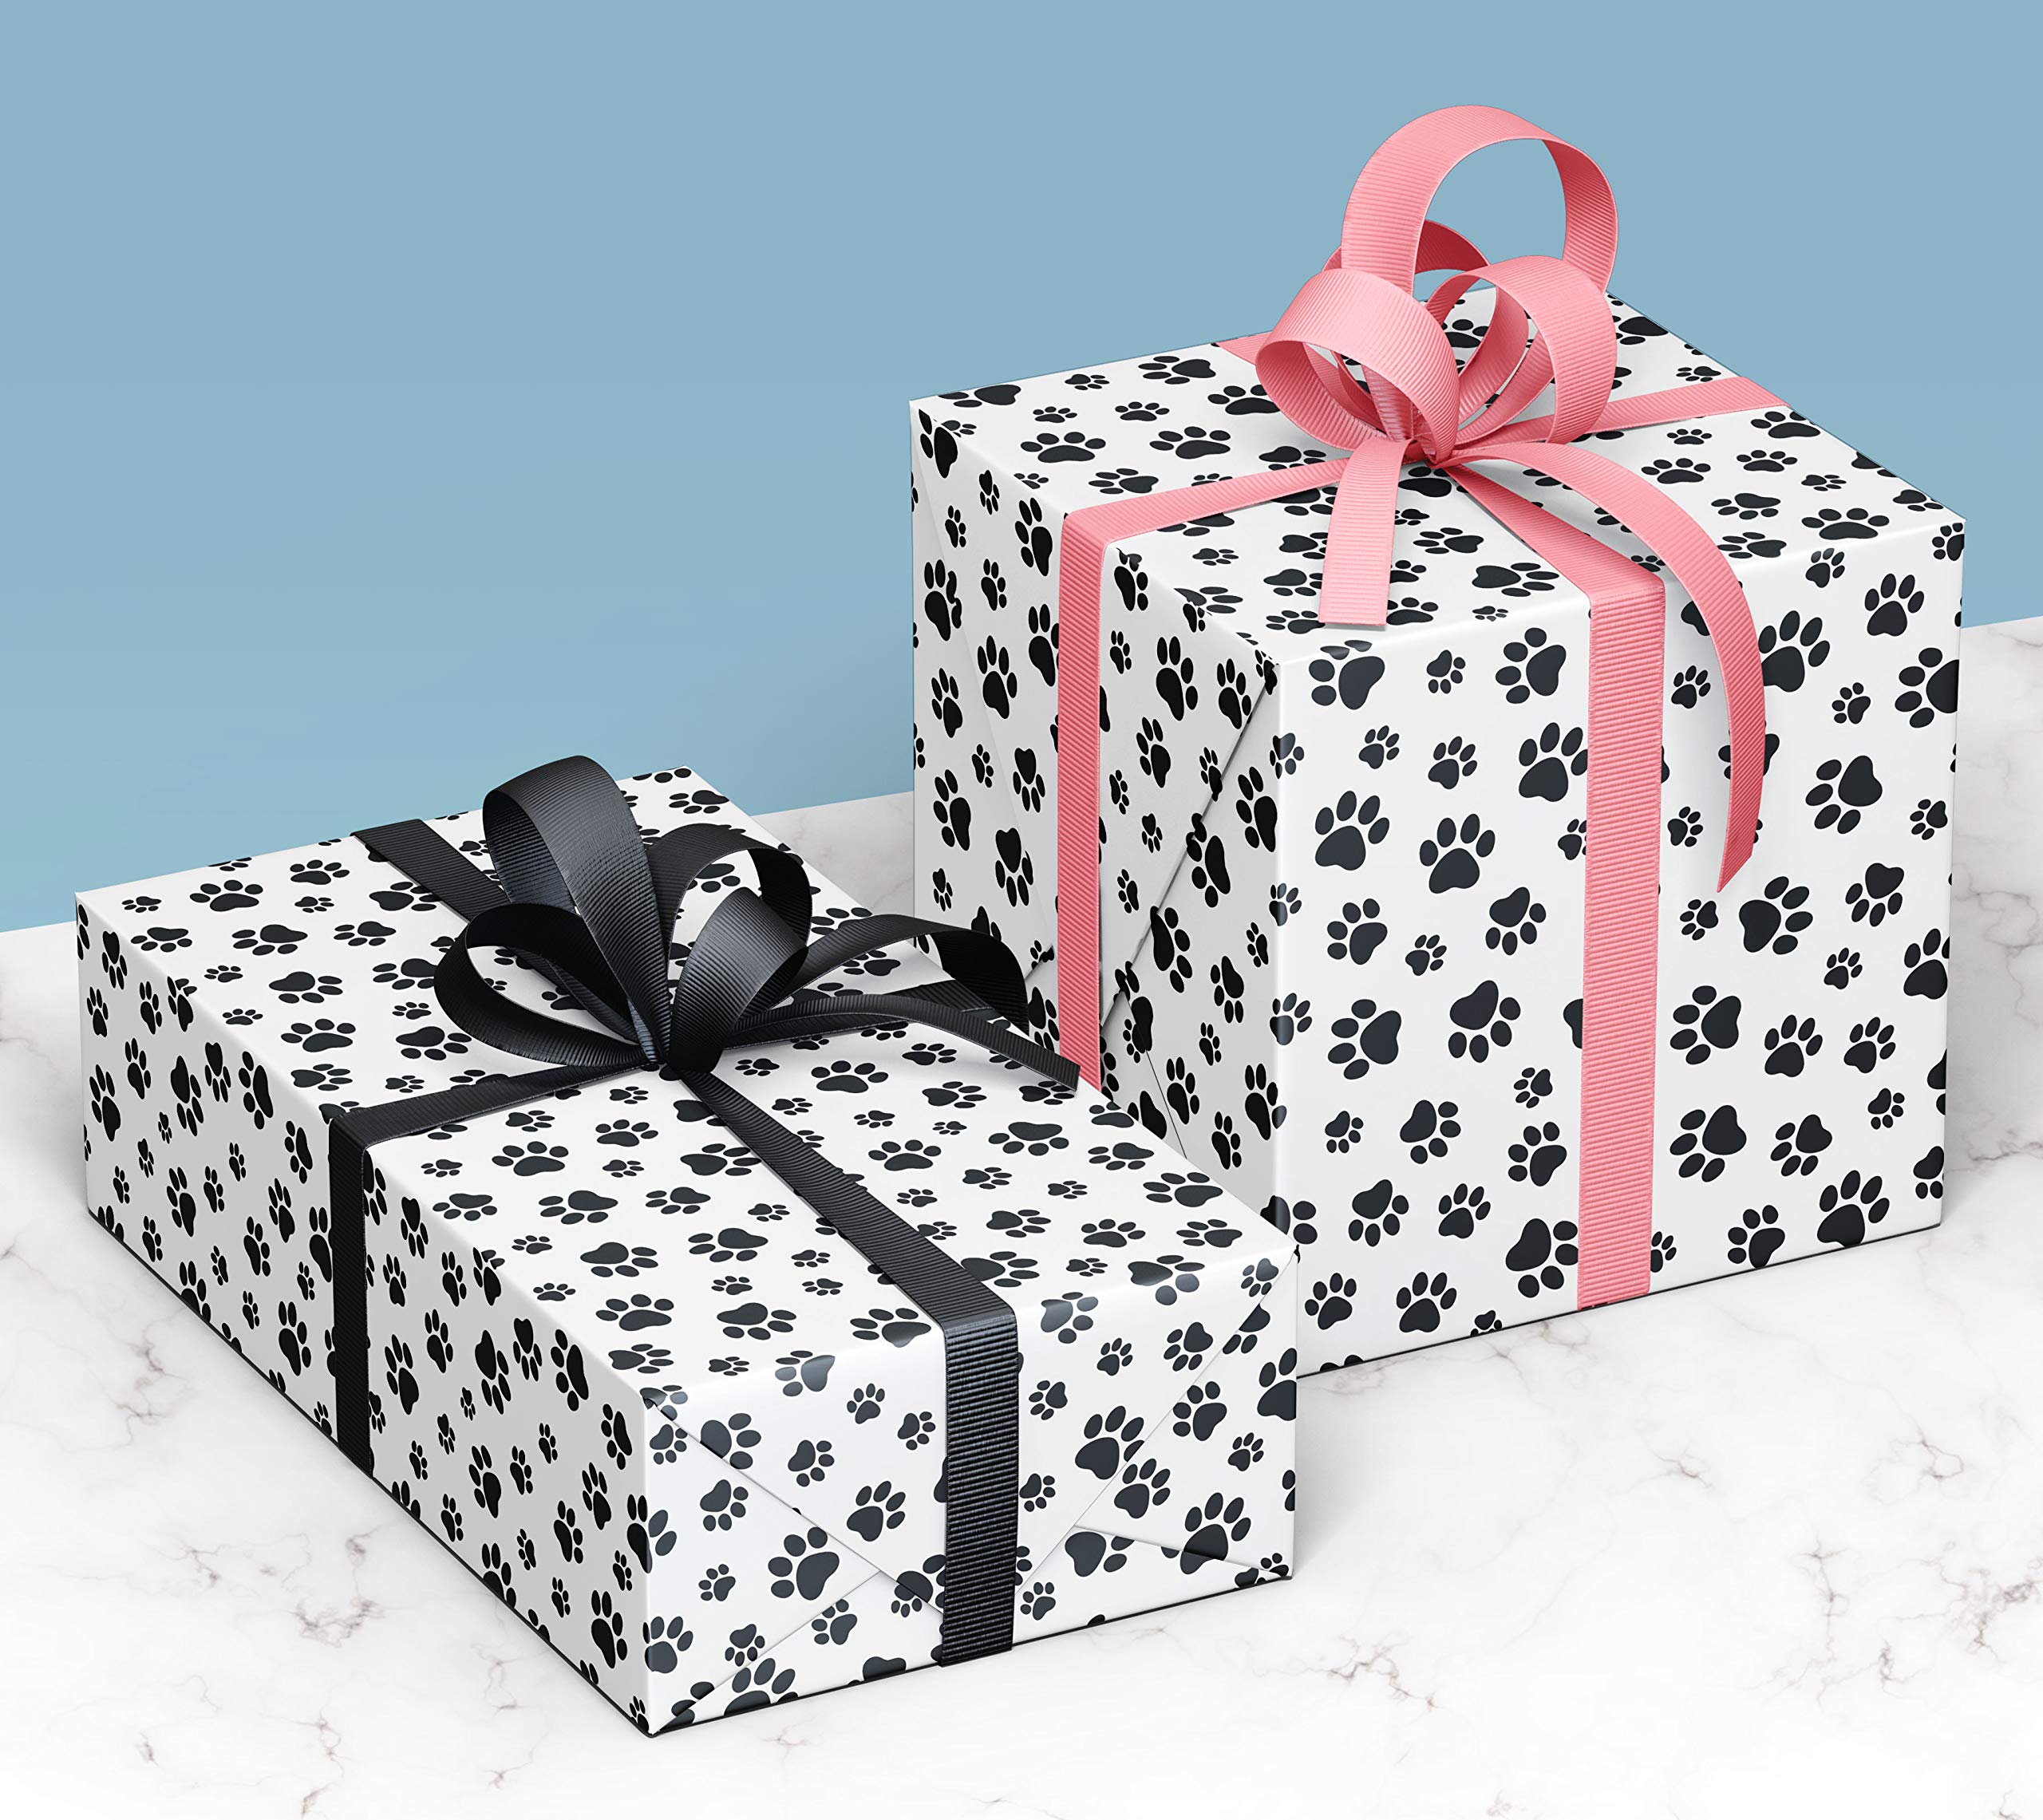 4 x Paw Print Recyclable Wrapping Paper Sheets 70cm x 50cm - Premium Gift Wrap Designed and Made in the UK for Dog, Cat and all Animal Lovers. Pet Safe.